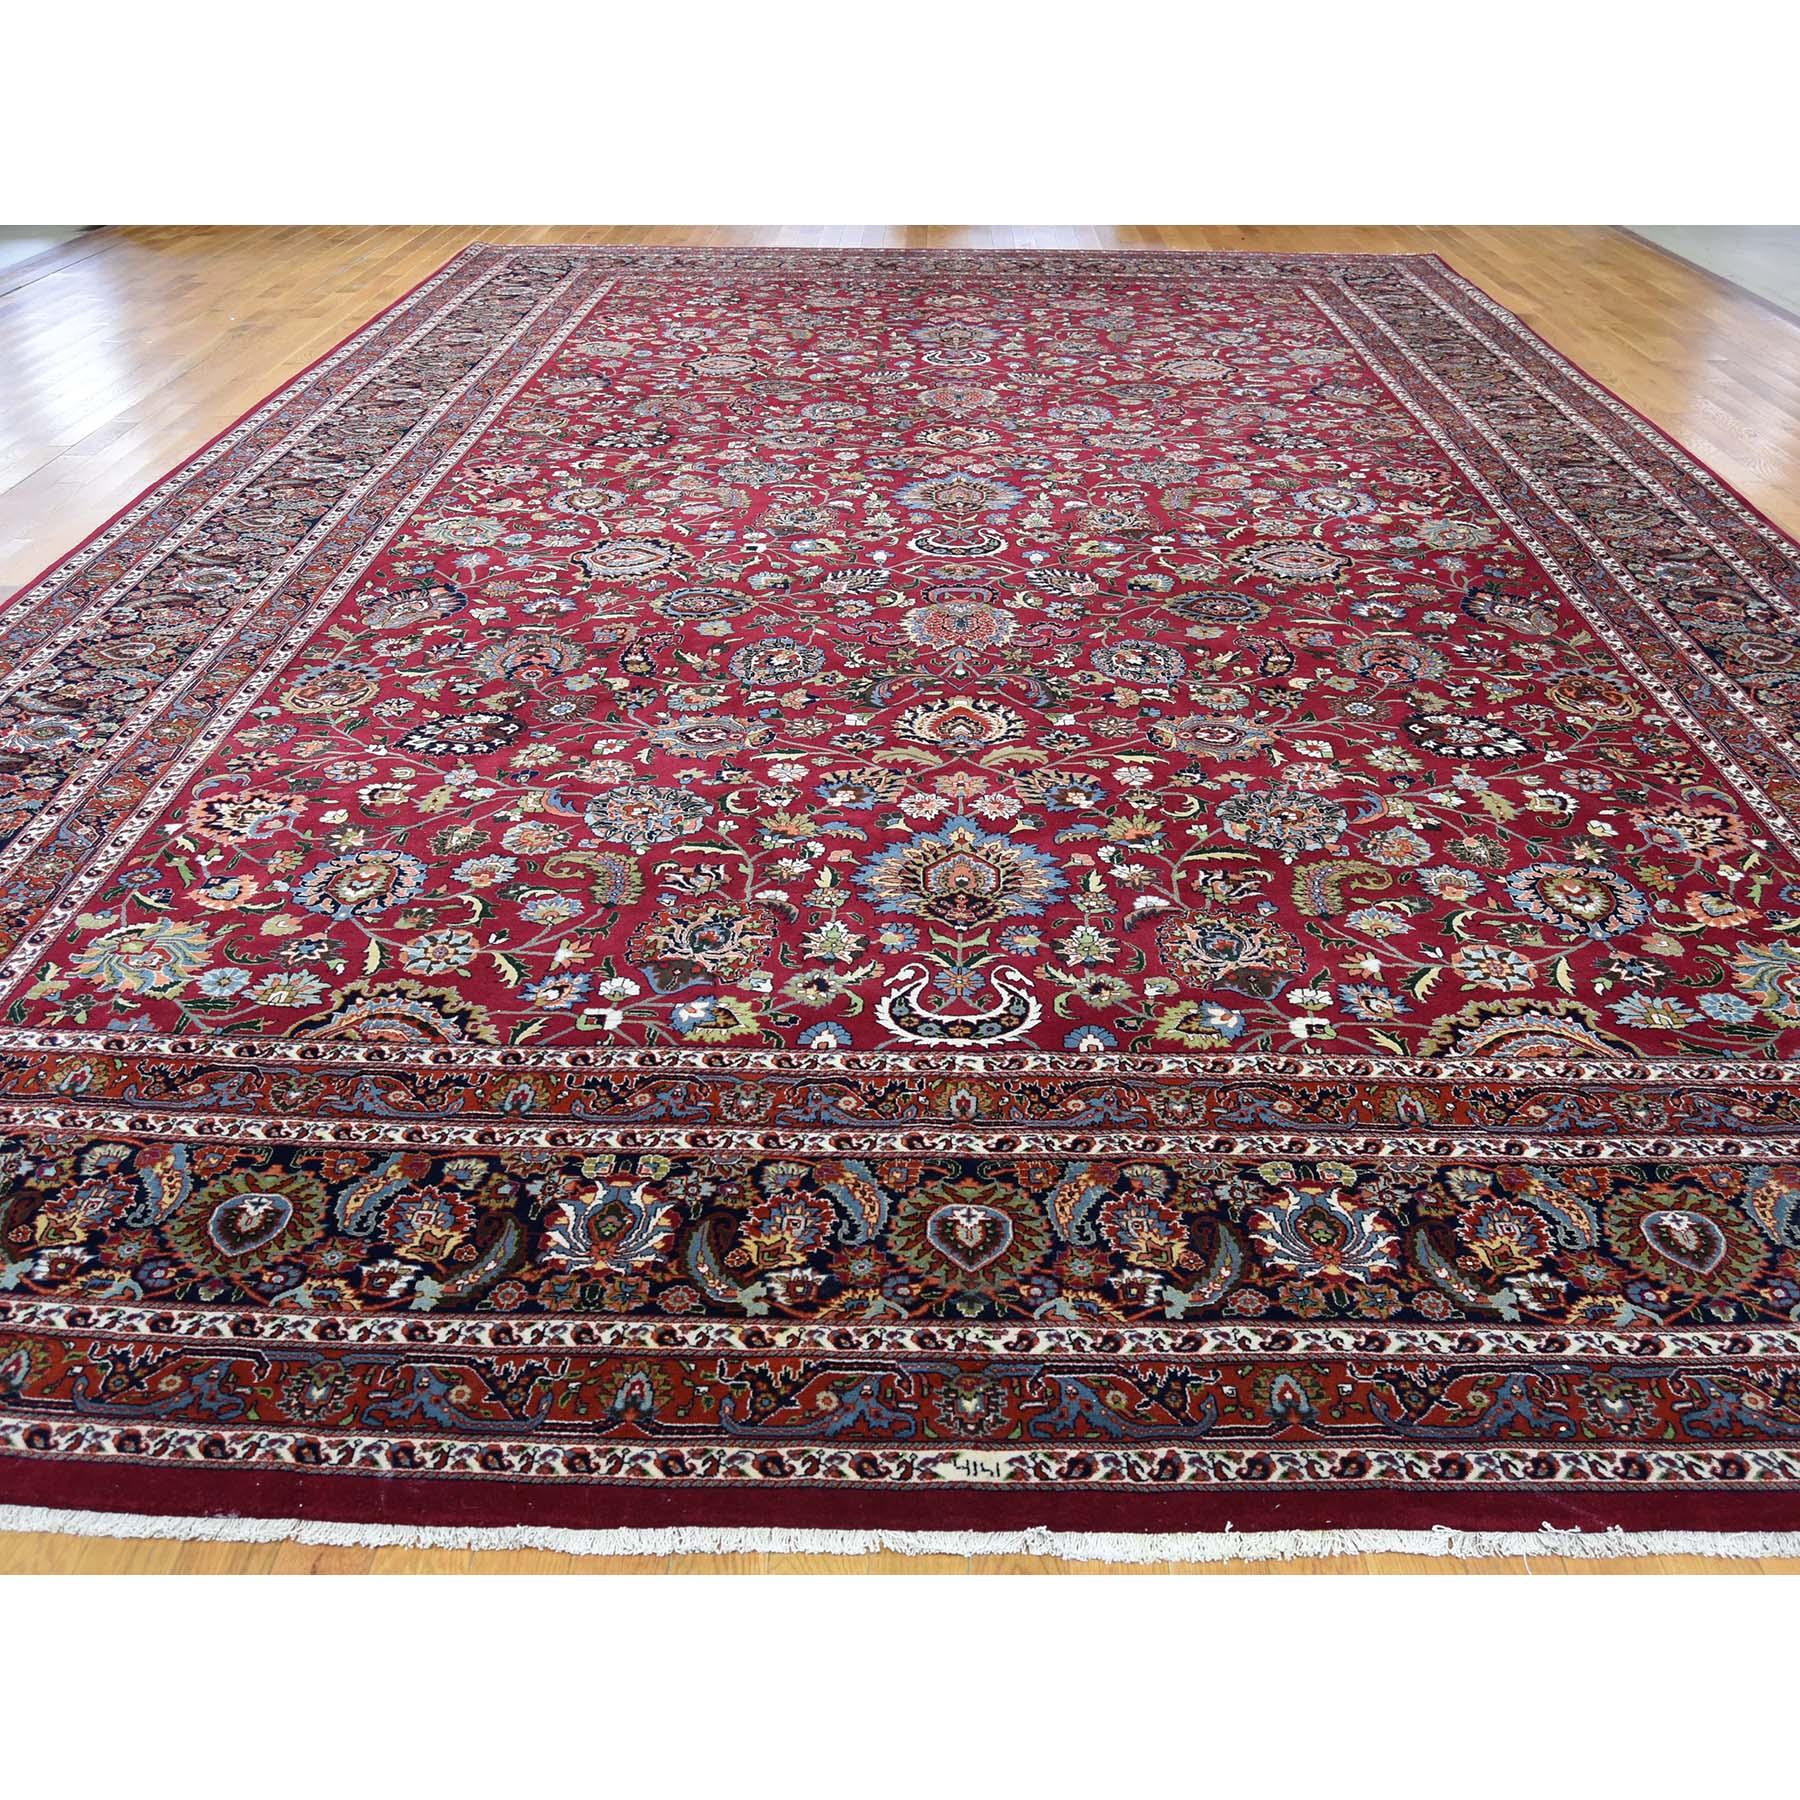 Medieval Persian Mashad 300 Kpsi High Quality Oversize Hand-Knotted Oriental Rug, 12'0